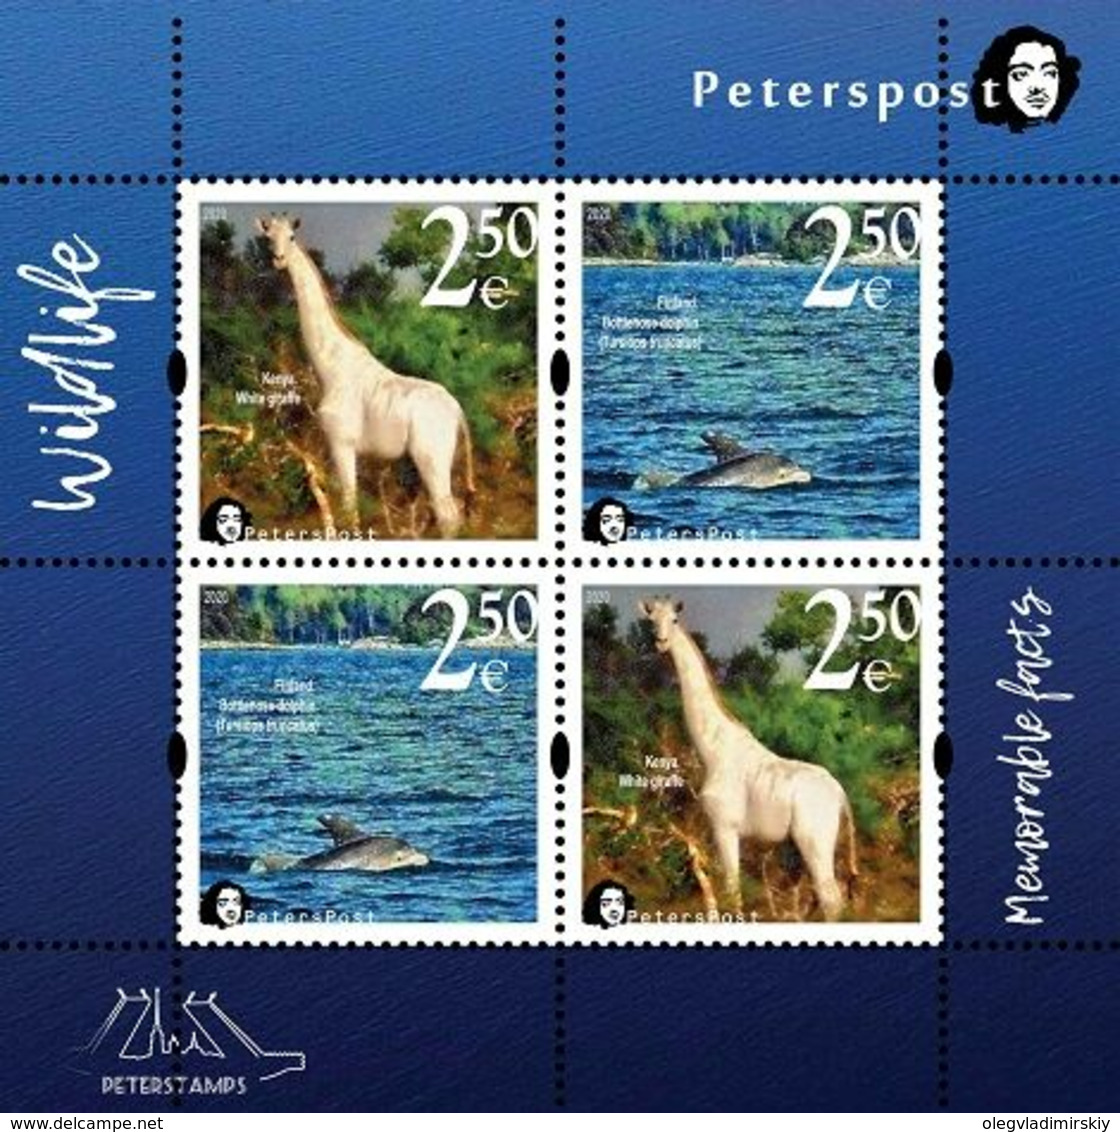 Finland. Peterspost. Fauna. Wild Life. "Memorable Facts", White Giraffe And Bottlenose Dolphin, 2020, Block - Neufs